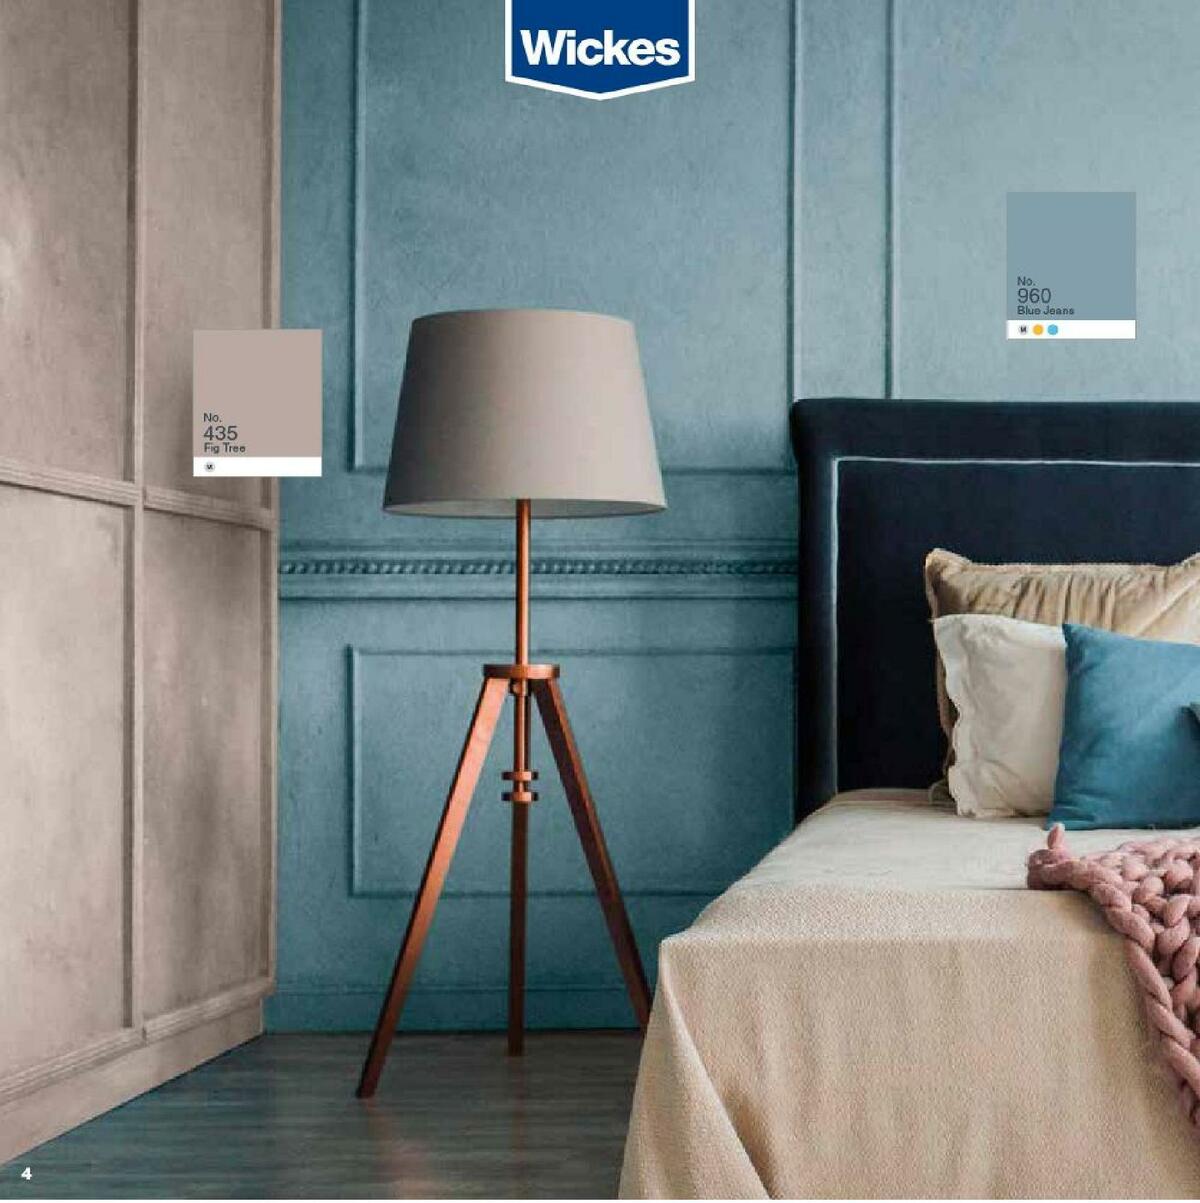 Wickes Paint Brochure Offers from 1 March